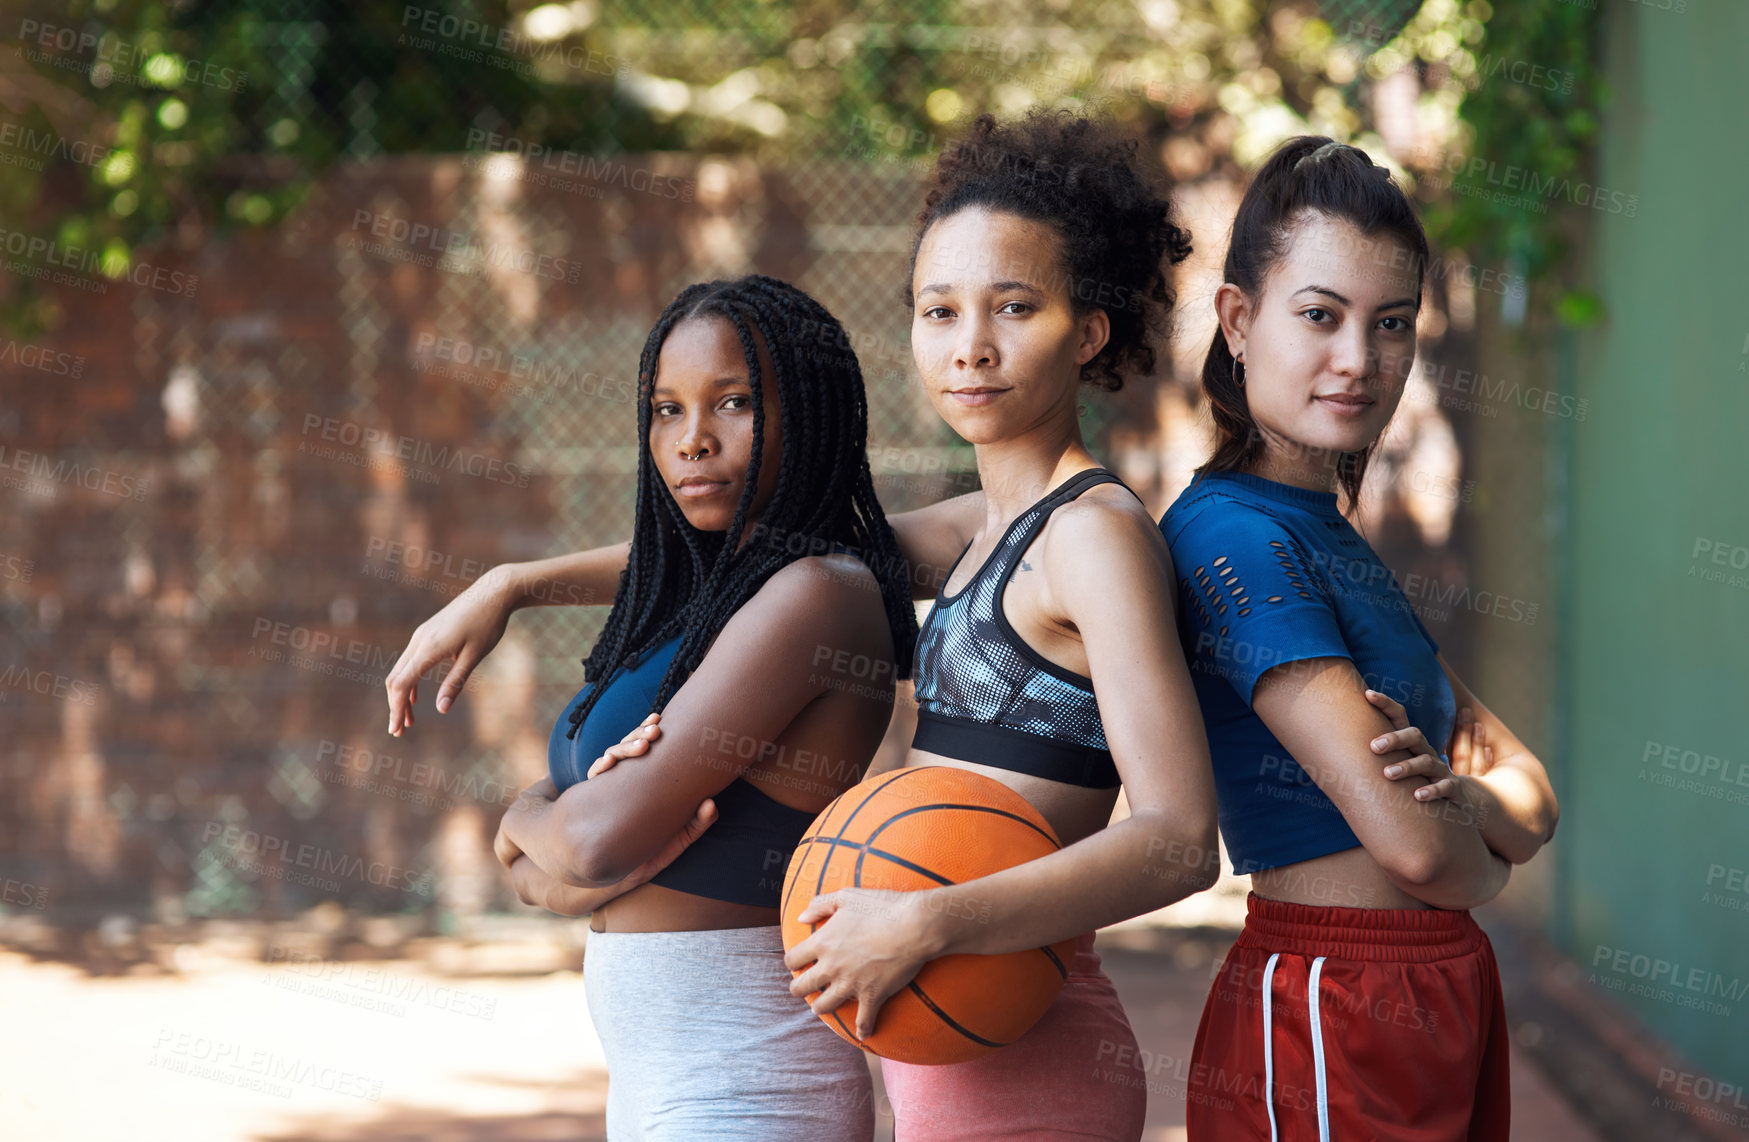 Buy stock photo Cropped portrait of three attractive young female athletes standing together on the basketball court